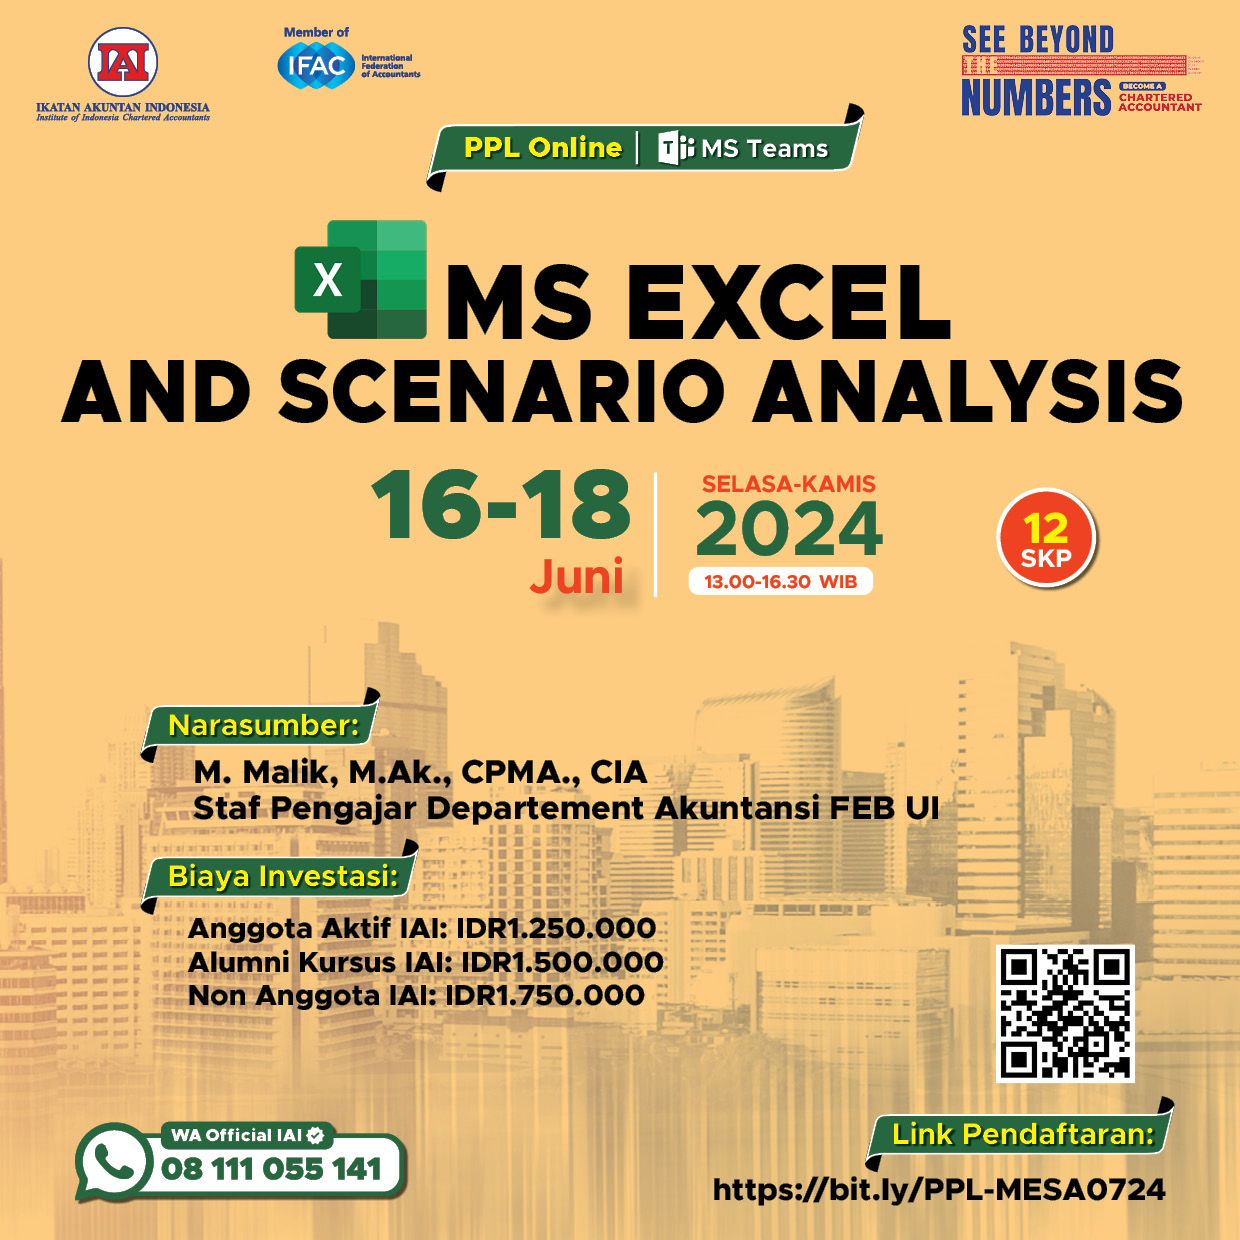 Ms. Excel and Scenario Analysis